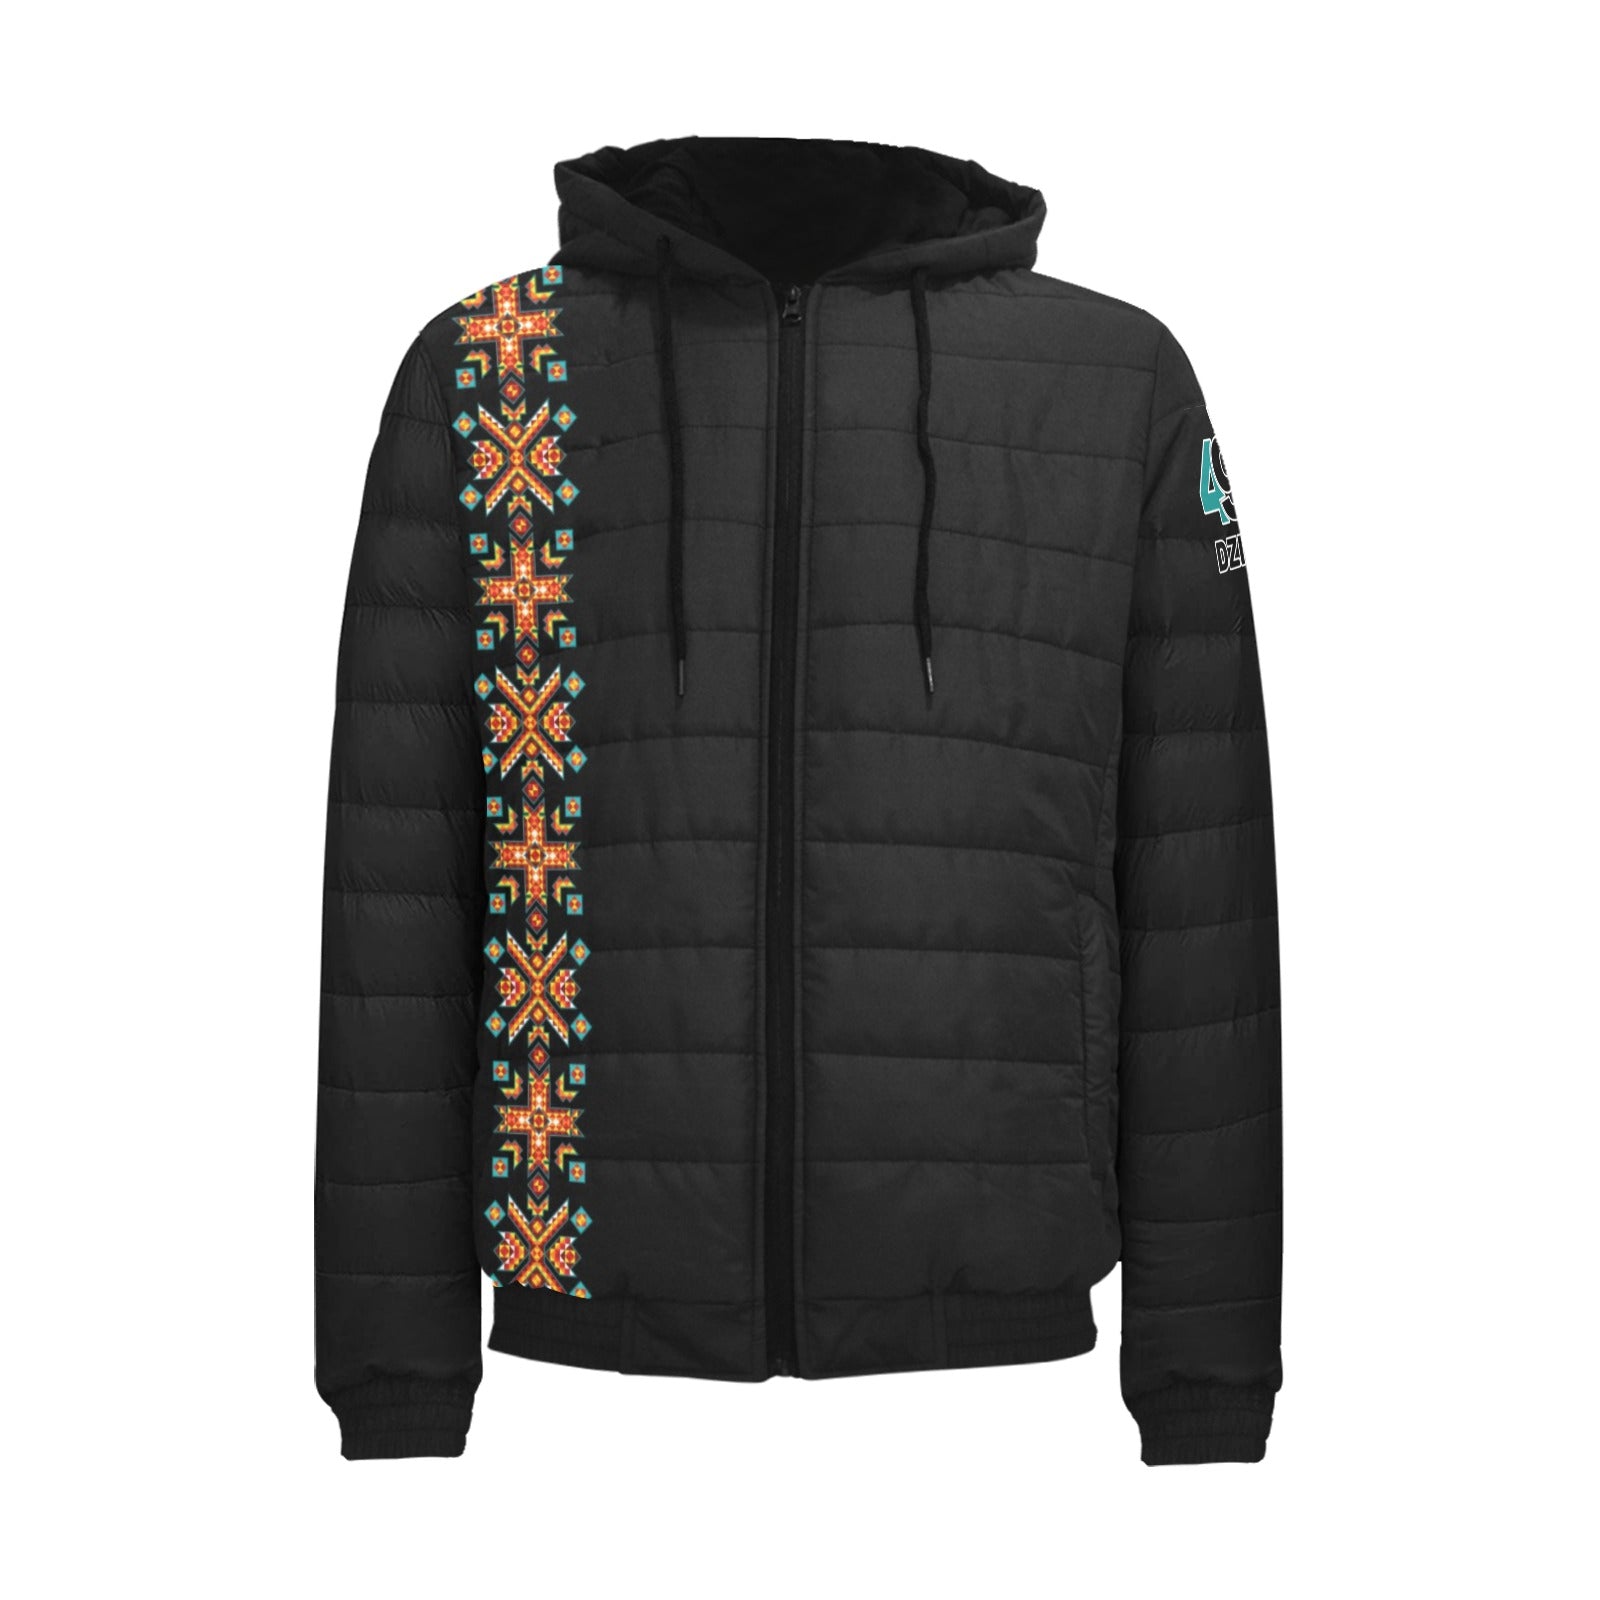 Teal Fire Men's Padded Hooded Jacket